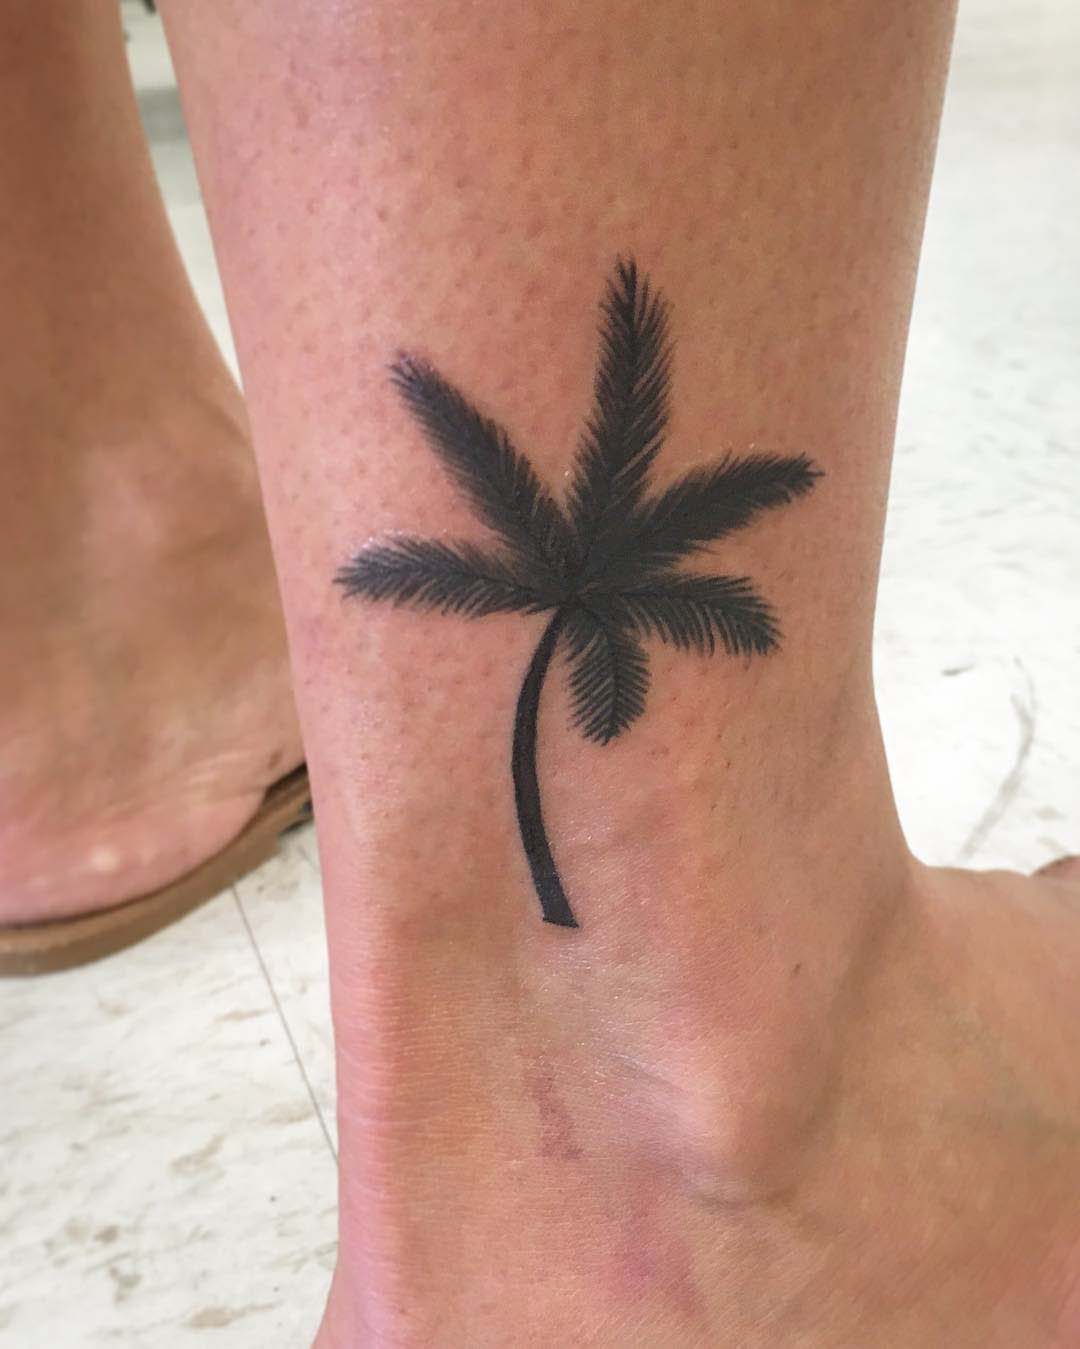 Top 9 Stupendous Palm Tree Tattoos for Women and Men